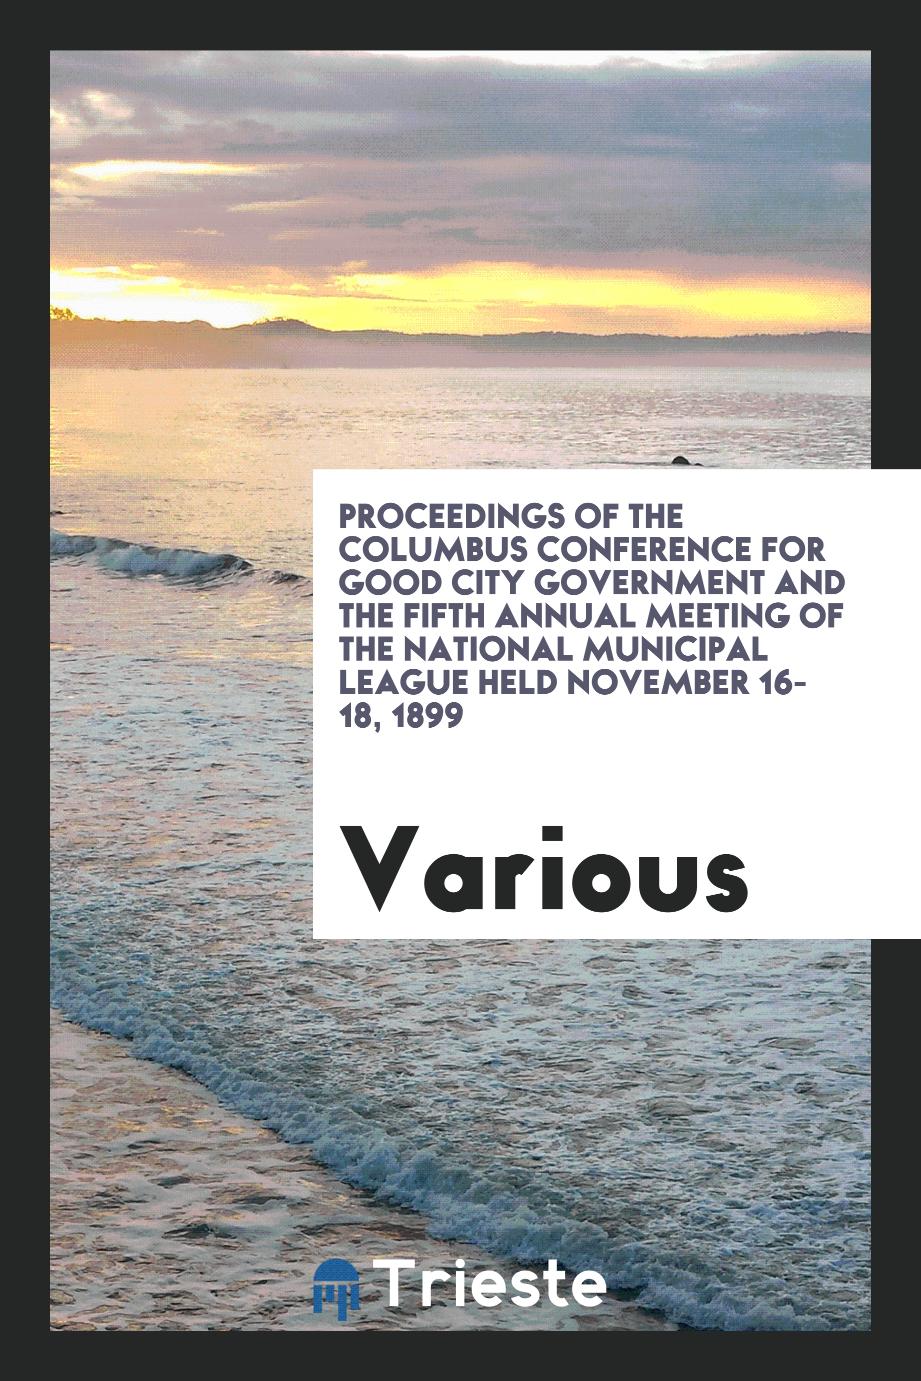 Proceedings of the Columbus Conference for Good City Government and the Fifth Annual Meeting of the National Municipal League Held November 16-18, 1899